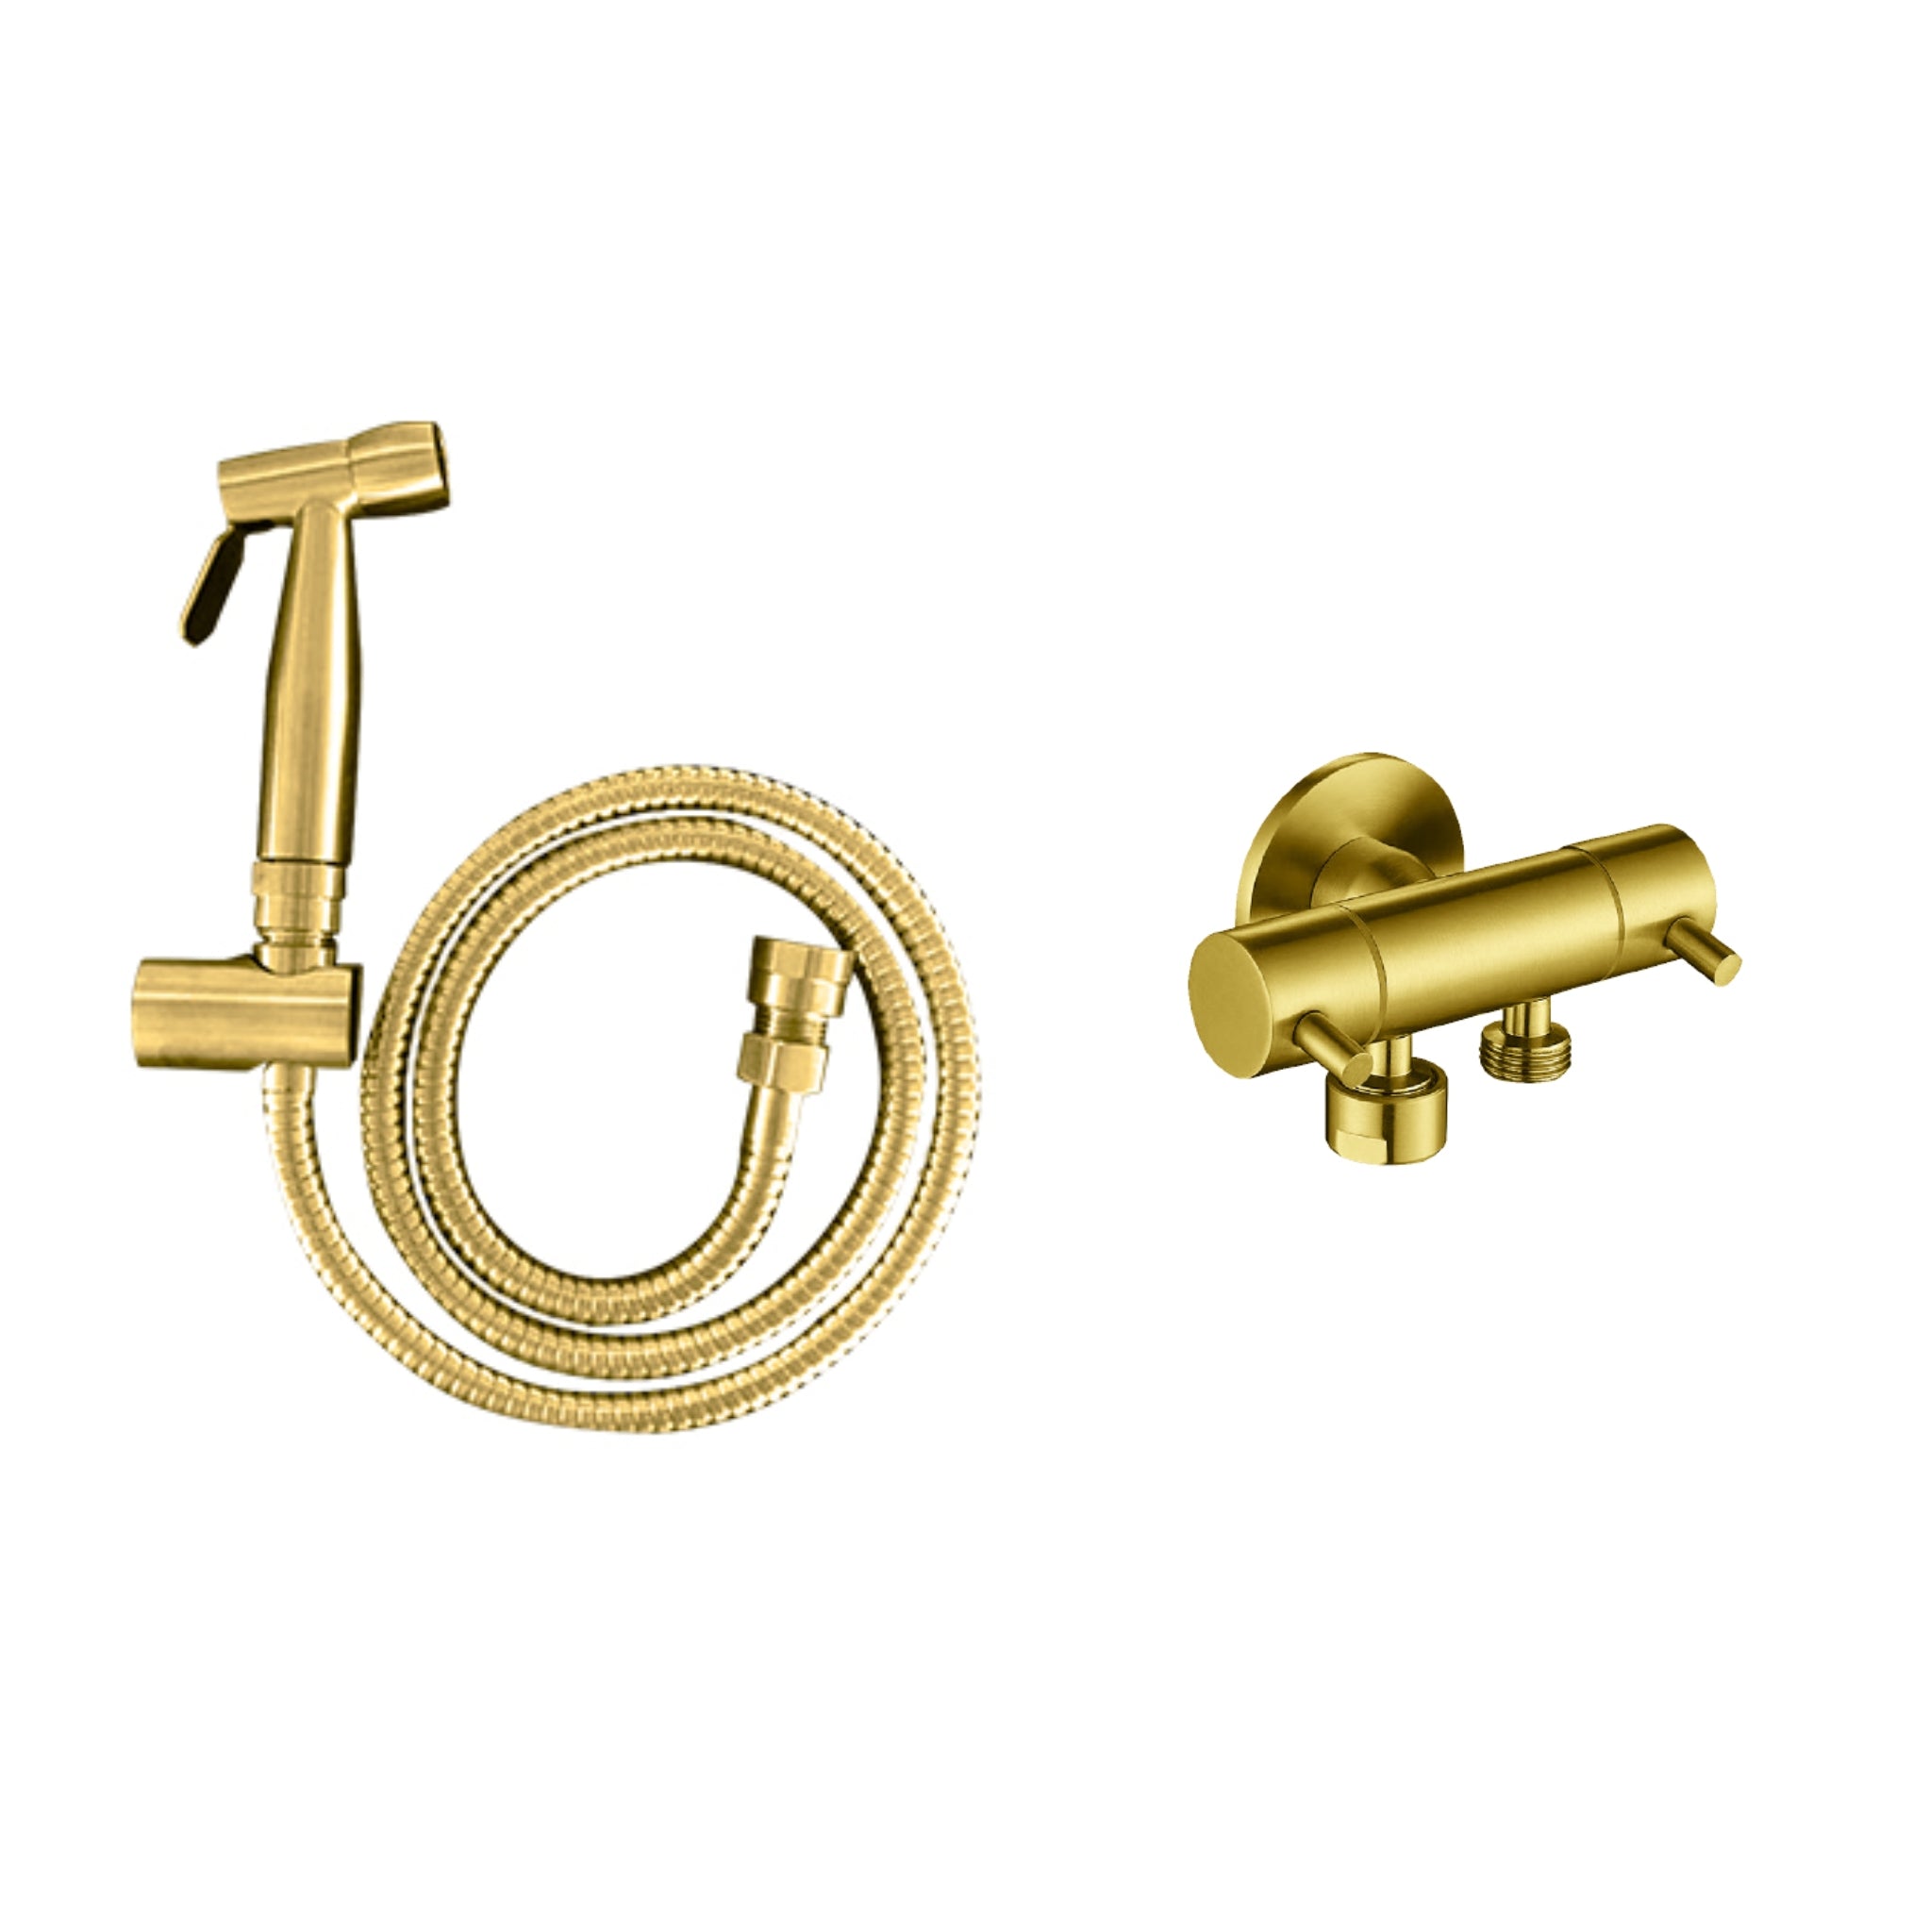 LINKWARE TRIGGER SPRAY WITH REINFORCED HOSE & DUAL MINI CISTERN COCK GOLD 1200MM